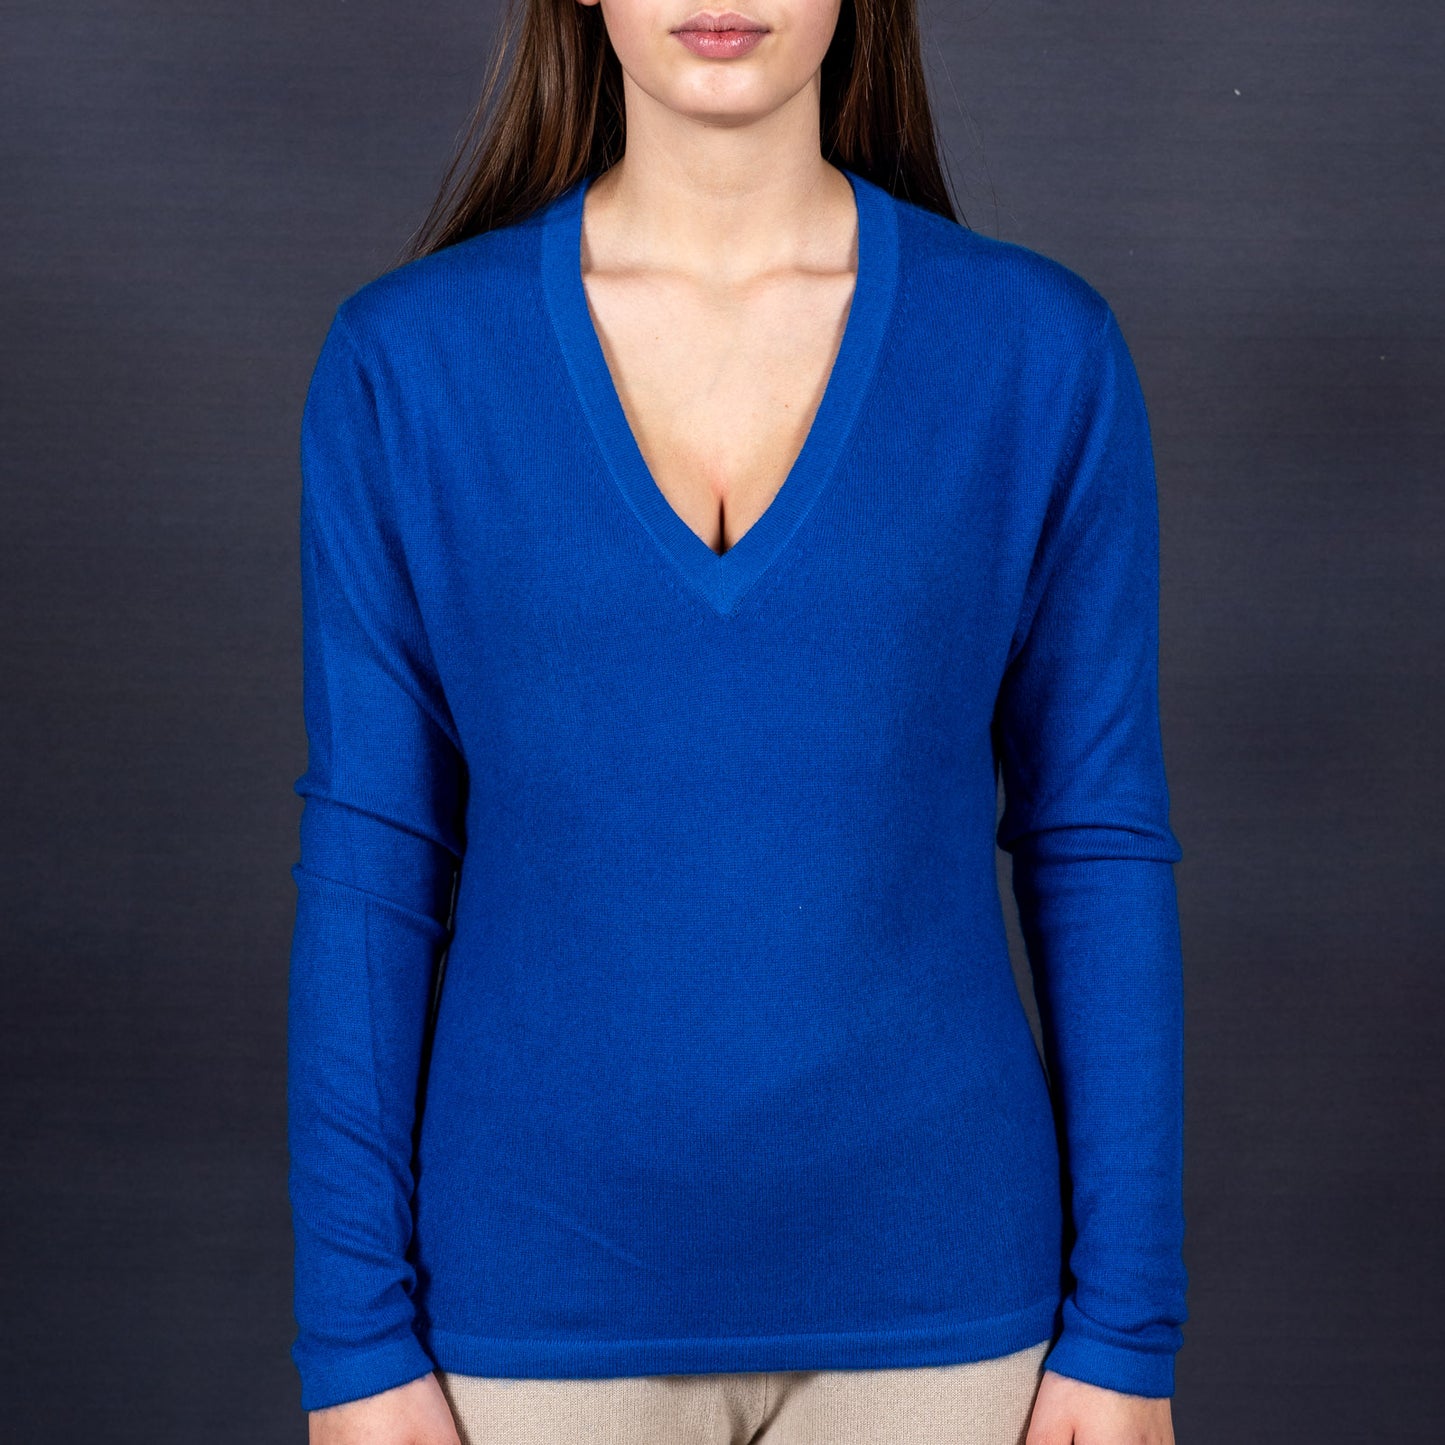 Pullover 100% cashmere - in 12 different colors to match your STELLA ESVARA scarf - Deep V neckline, tailored, feminine and cuddly soft